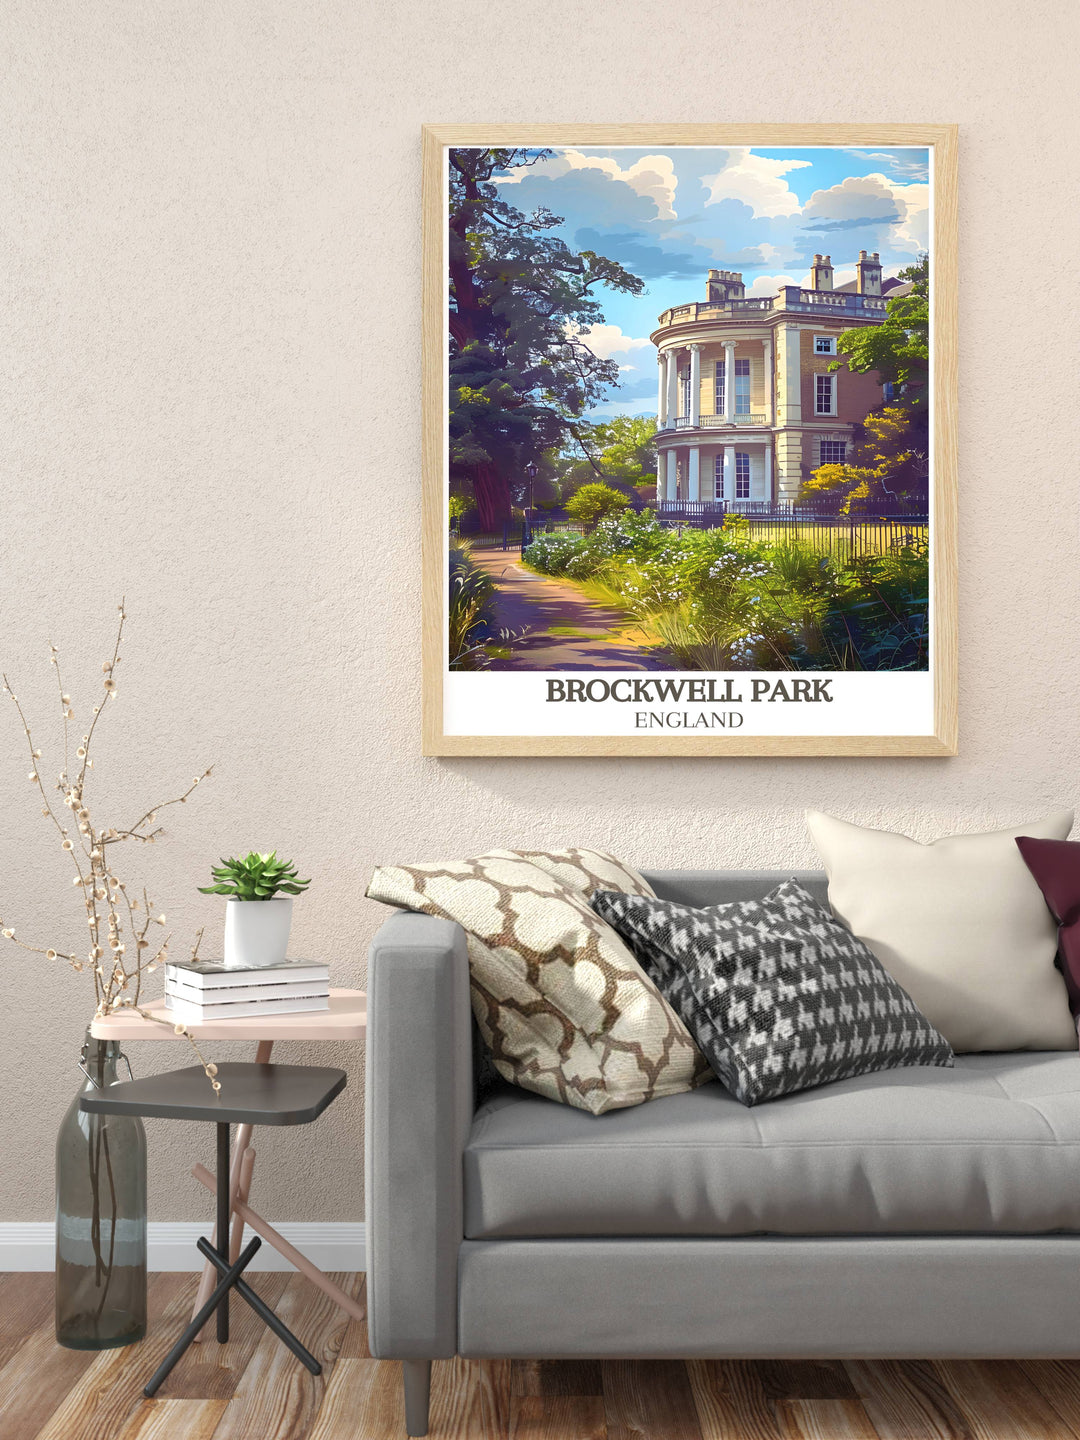 Artistic depiction of Brockwell Hall during autumn with fallen leaves and soft sunset lighting, a stunning addition to any home décor